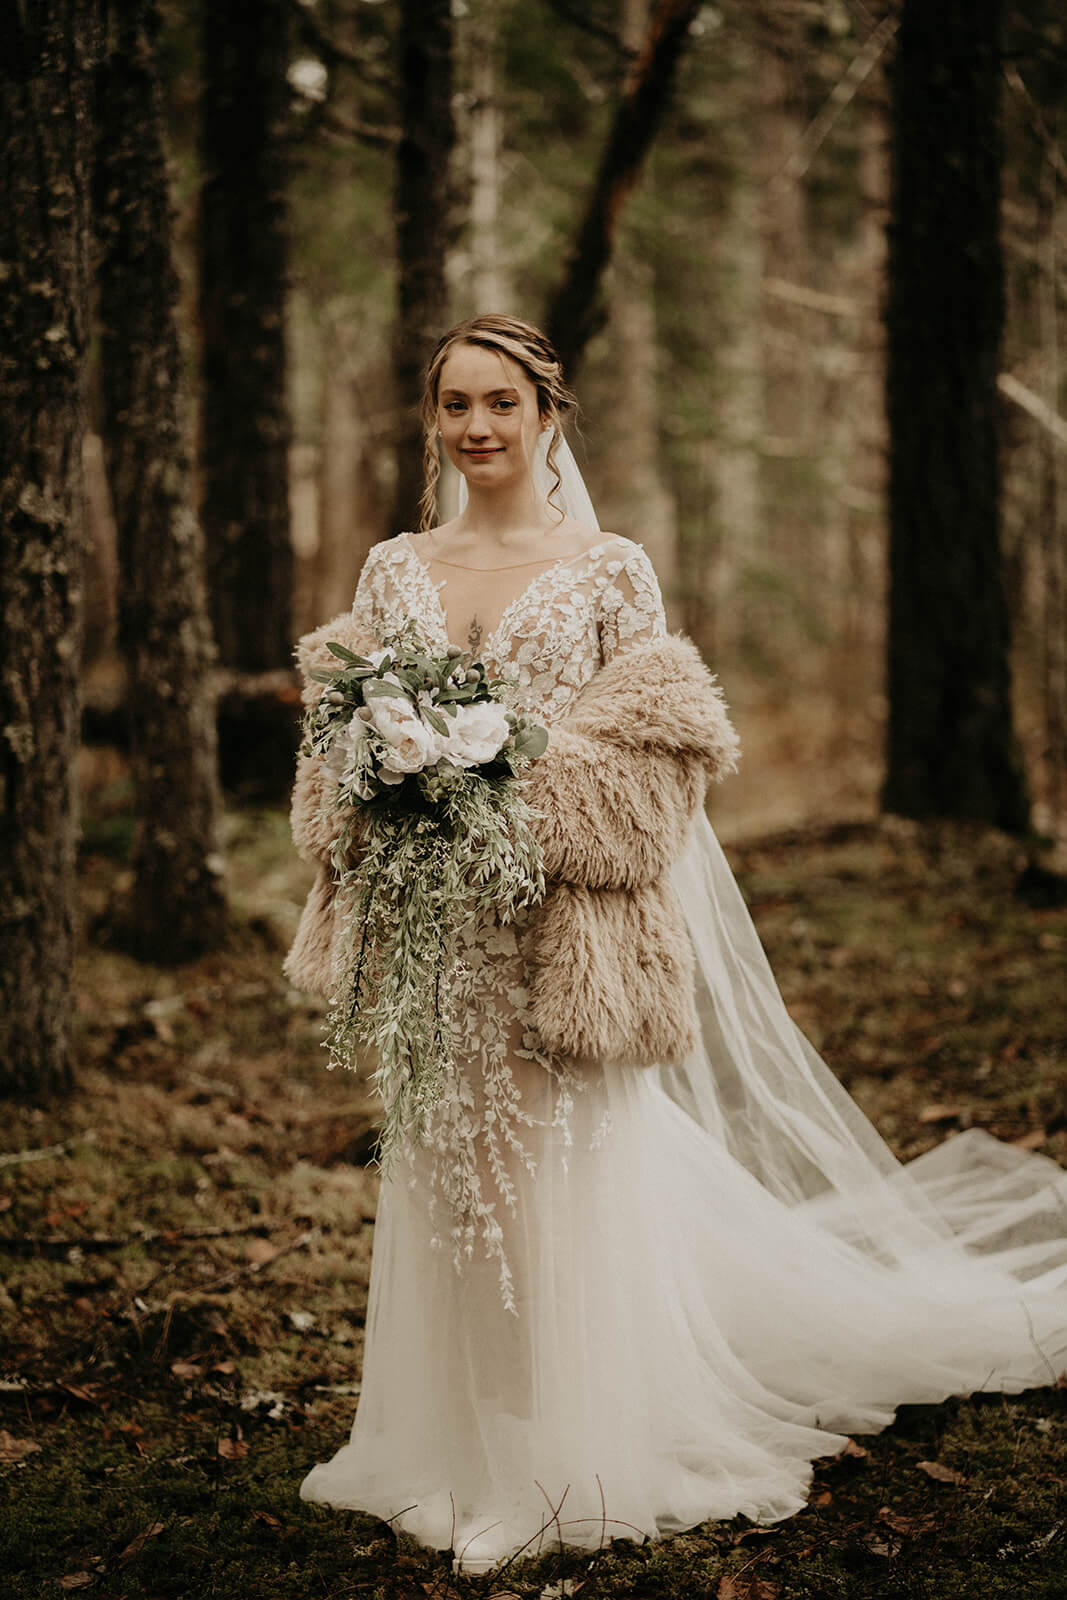 Bride holding white bouquet in the woods before mount rainier elopement ceremony